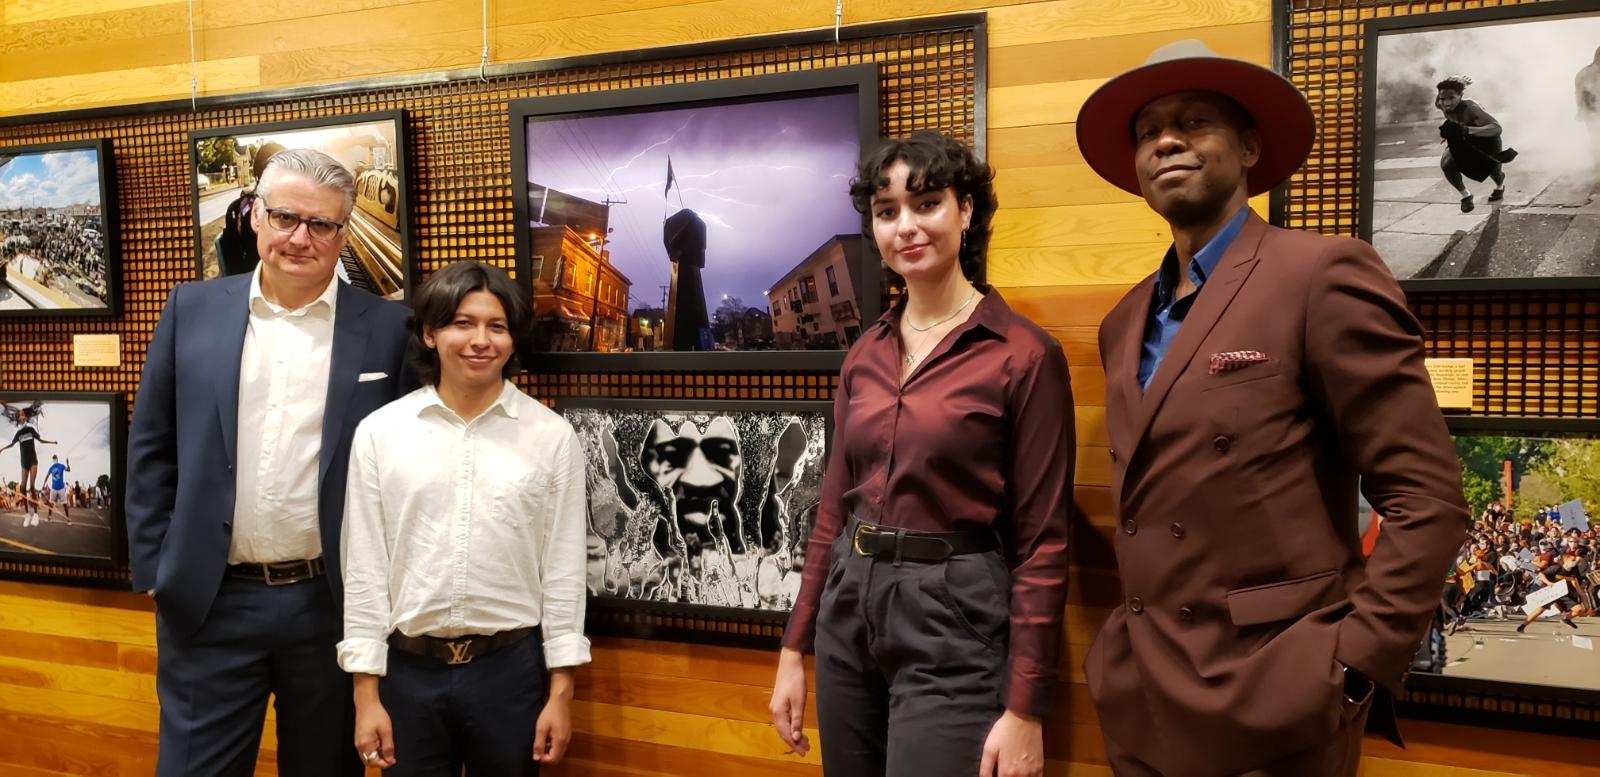 4 people stand, in fancy dress, in front of a photo gallery wall.